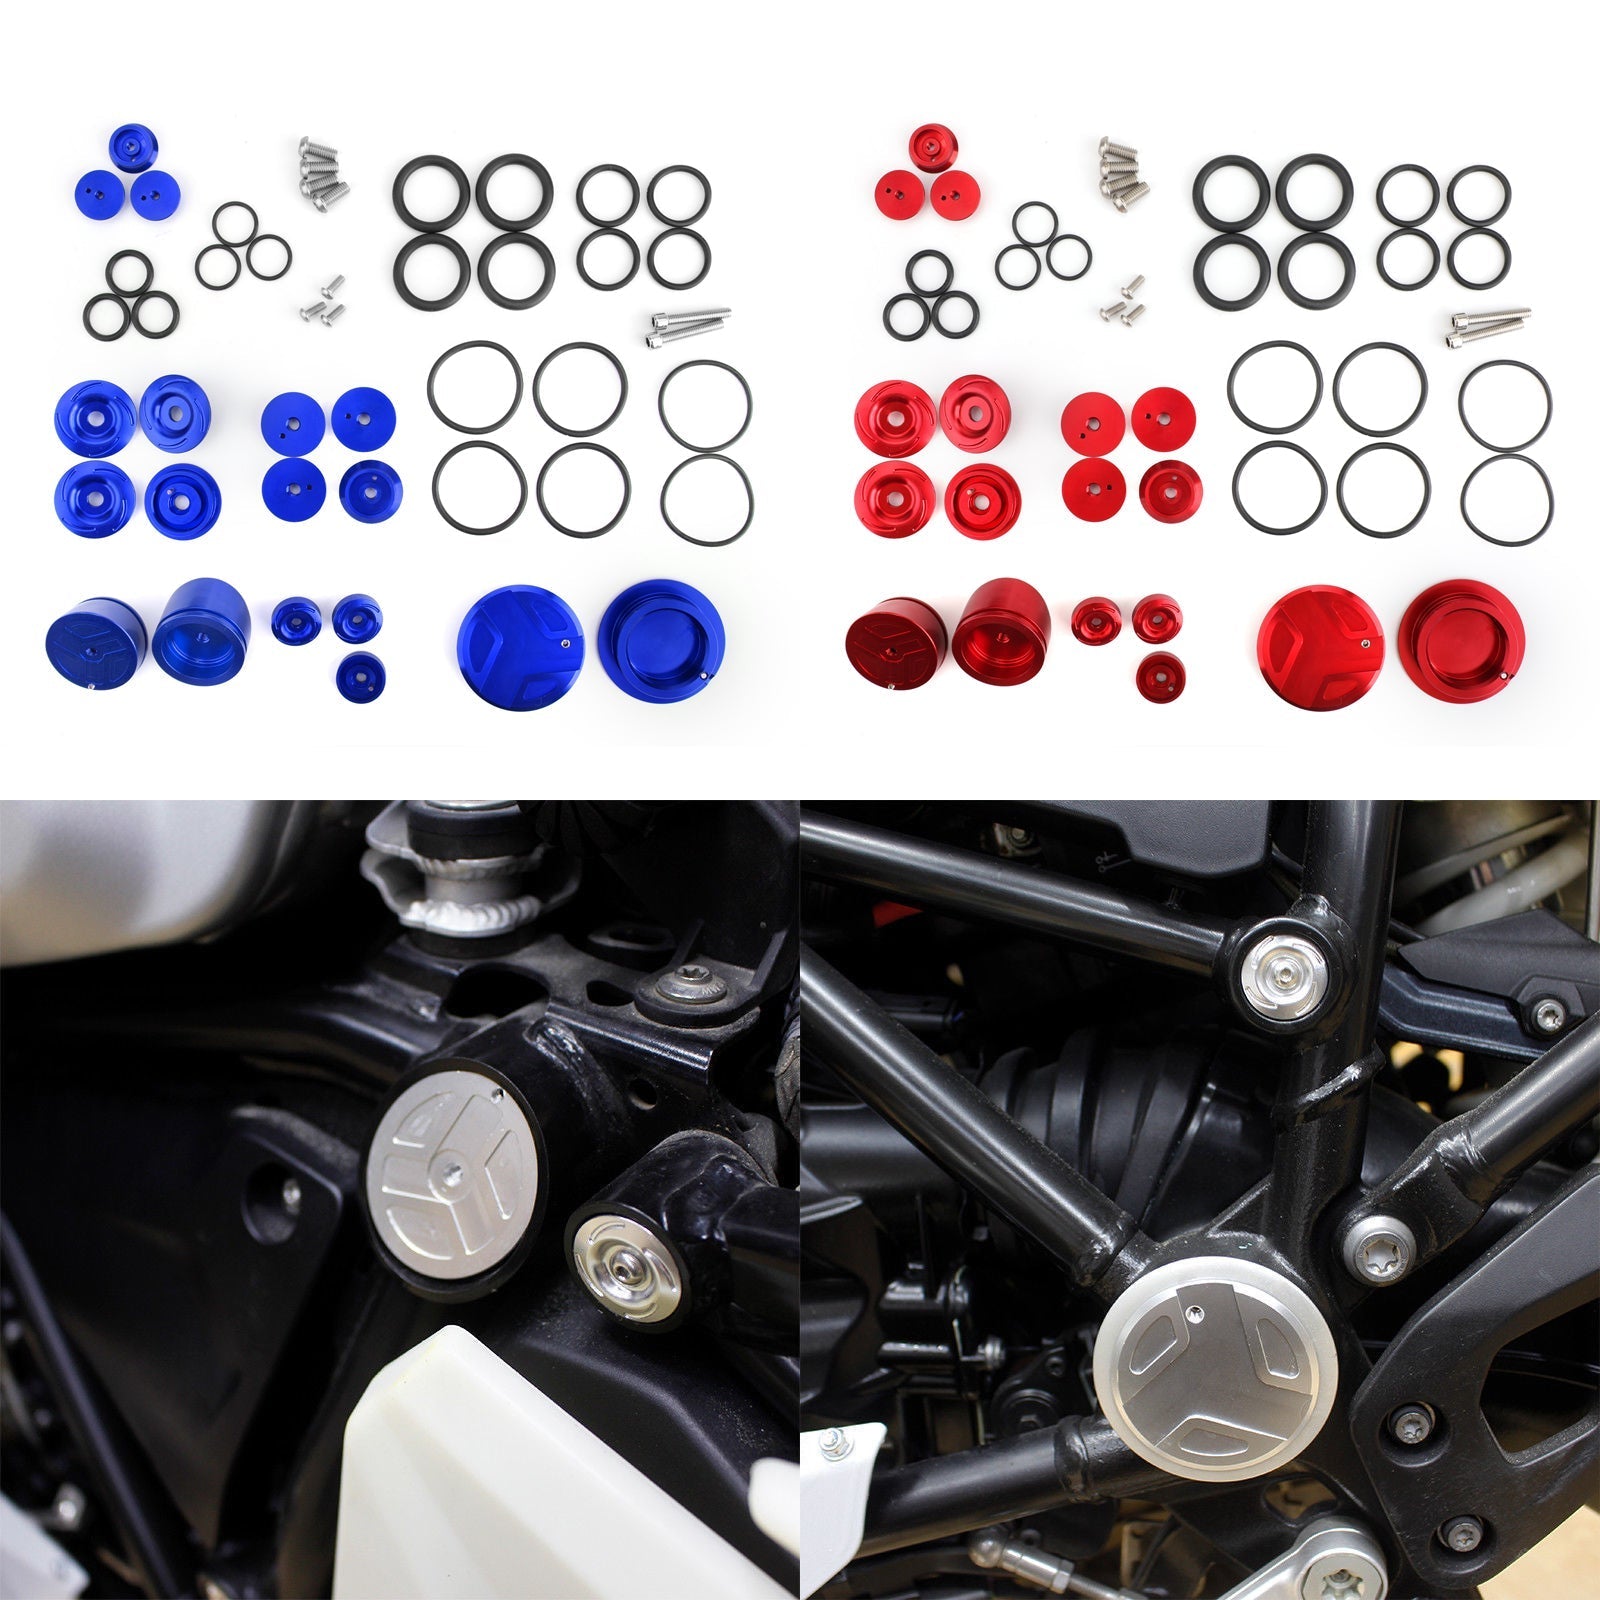 18x CNC ALUMINUM SIDE FRAME COVER CAPS PLUGS Fit for BMW R1200GS 2013-2019